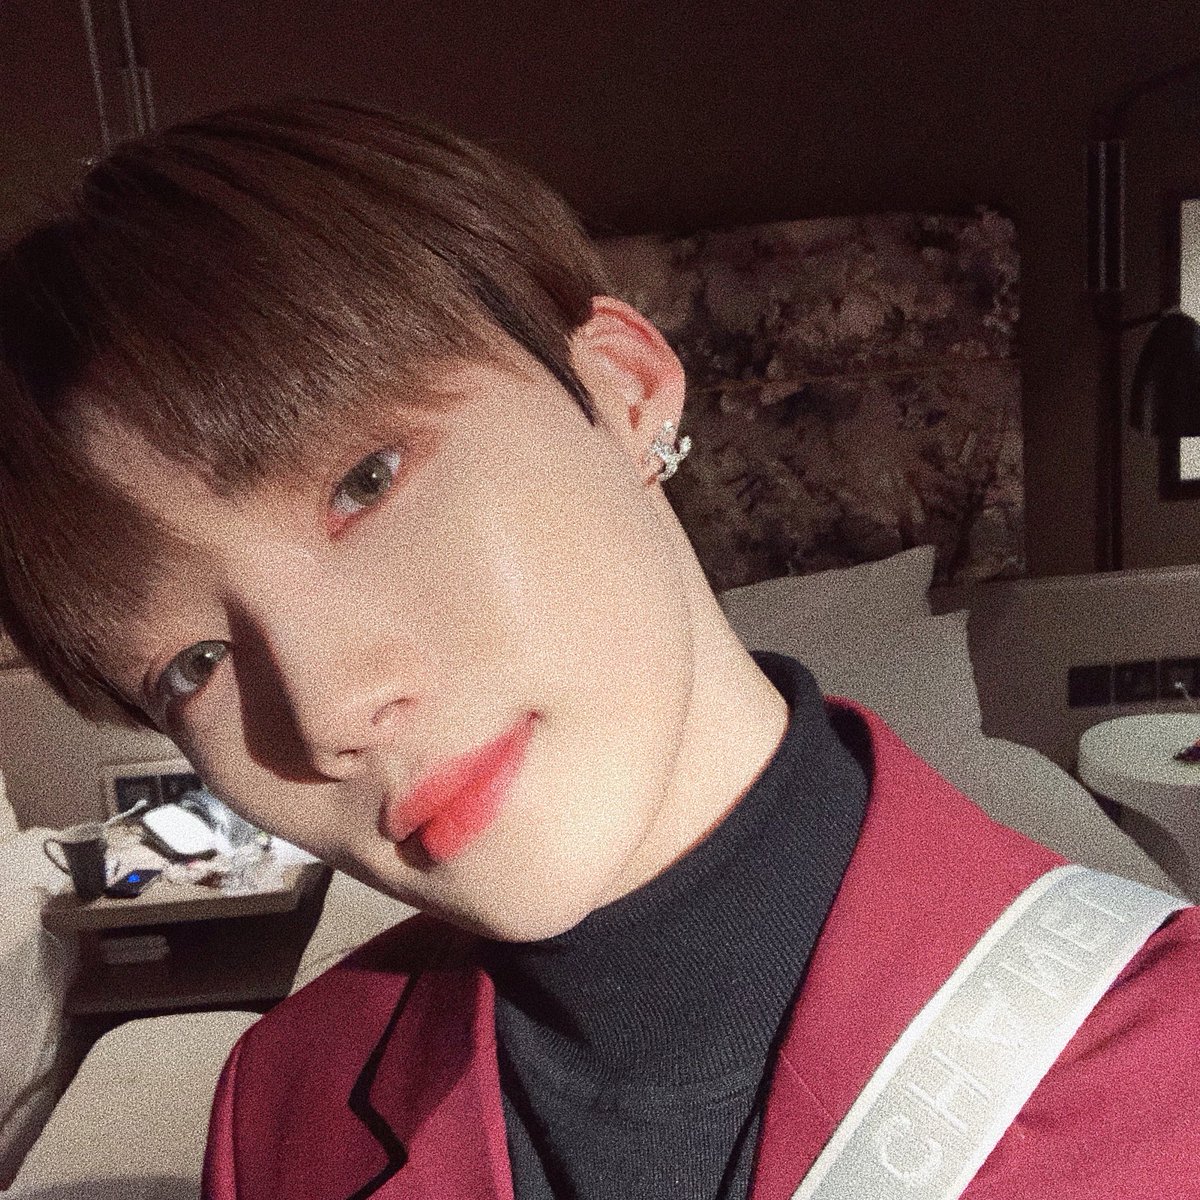  #NEW  #뉴- Always looking prettier than you- Fun and easy to bully him but he will make his comeback with something savage- Thrift shopping for vintage clothes together- Take lots of selca together- Lowkey judge people together